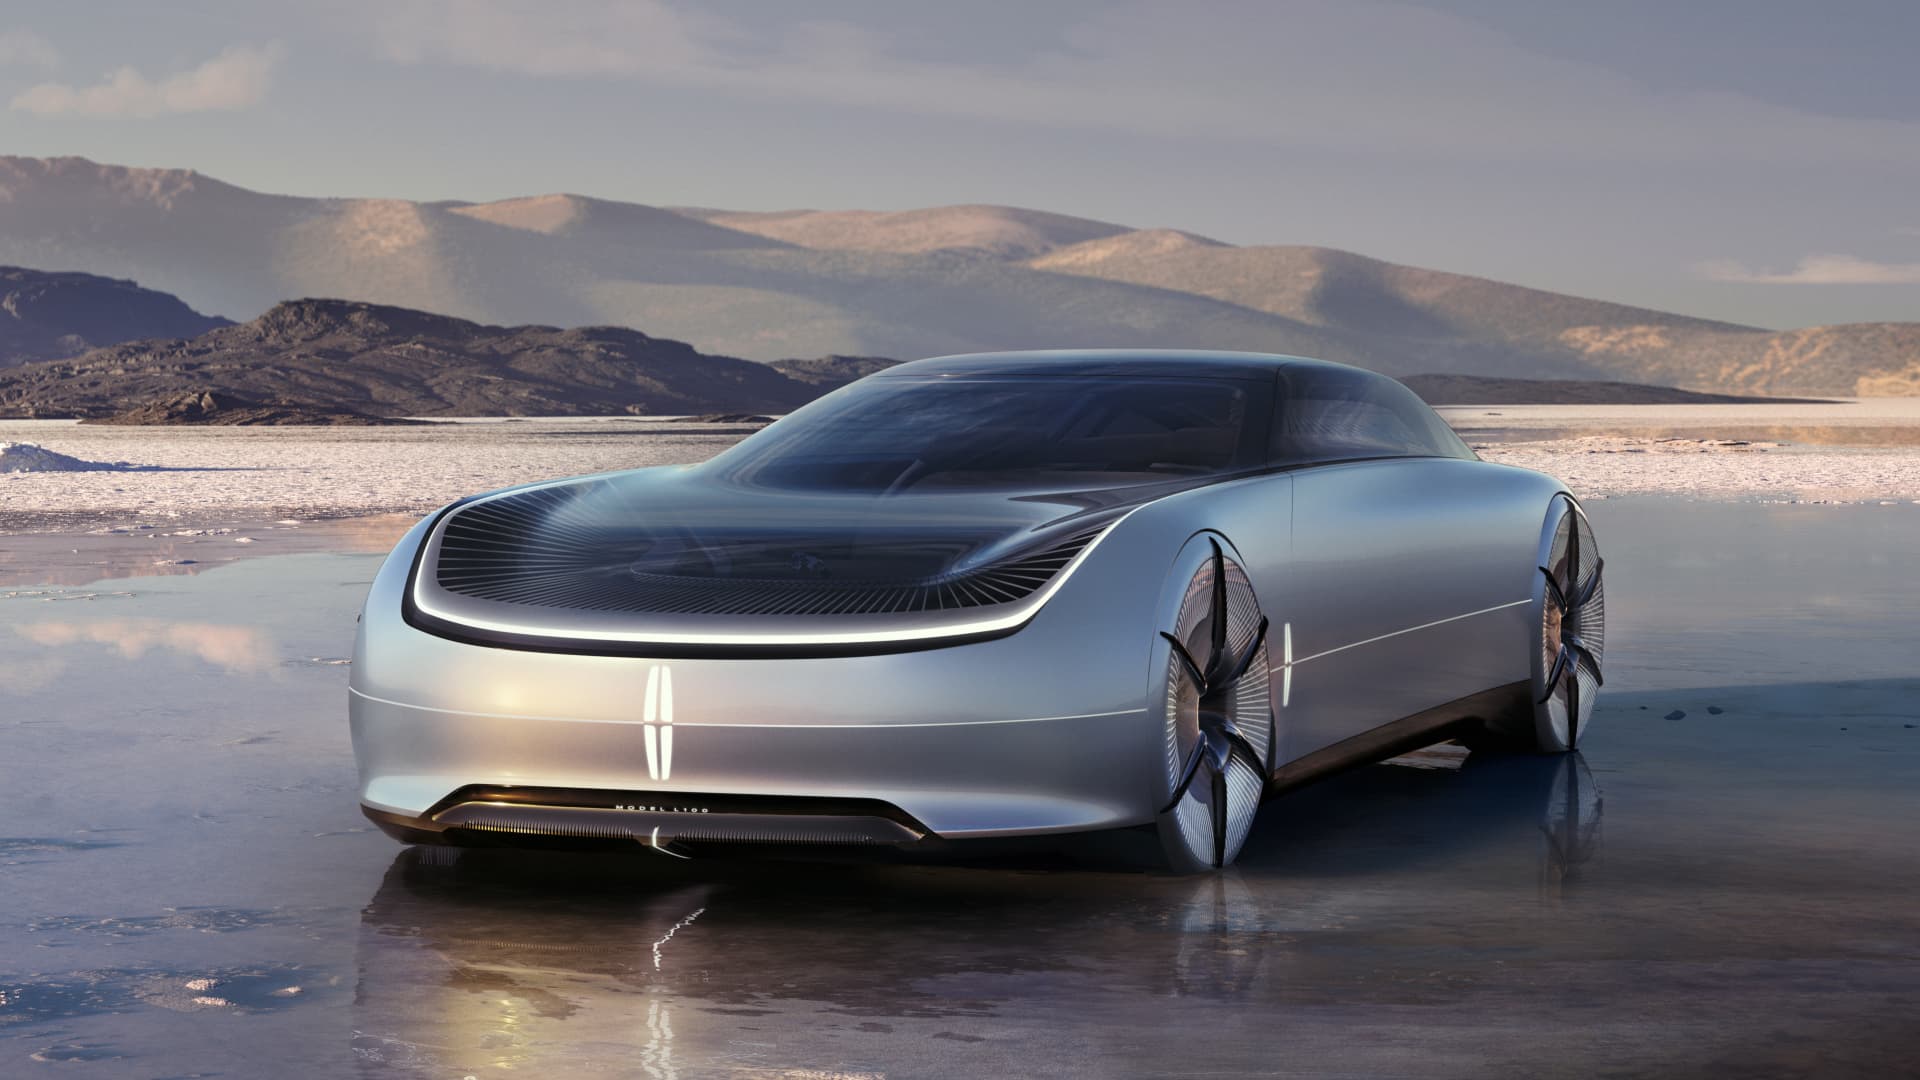 Take a look at Ford's futuristic vision for its luxury Lincoln brand